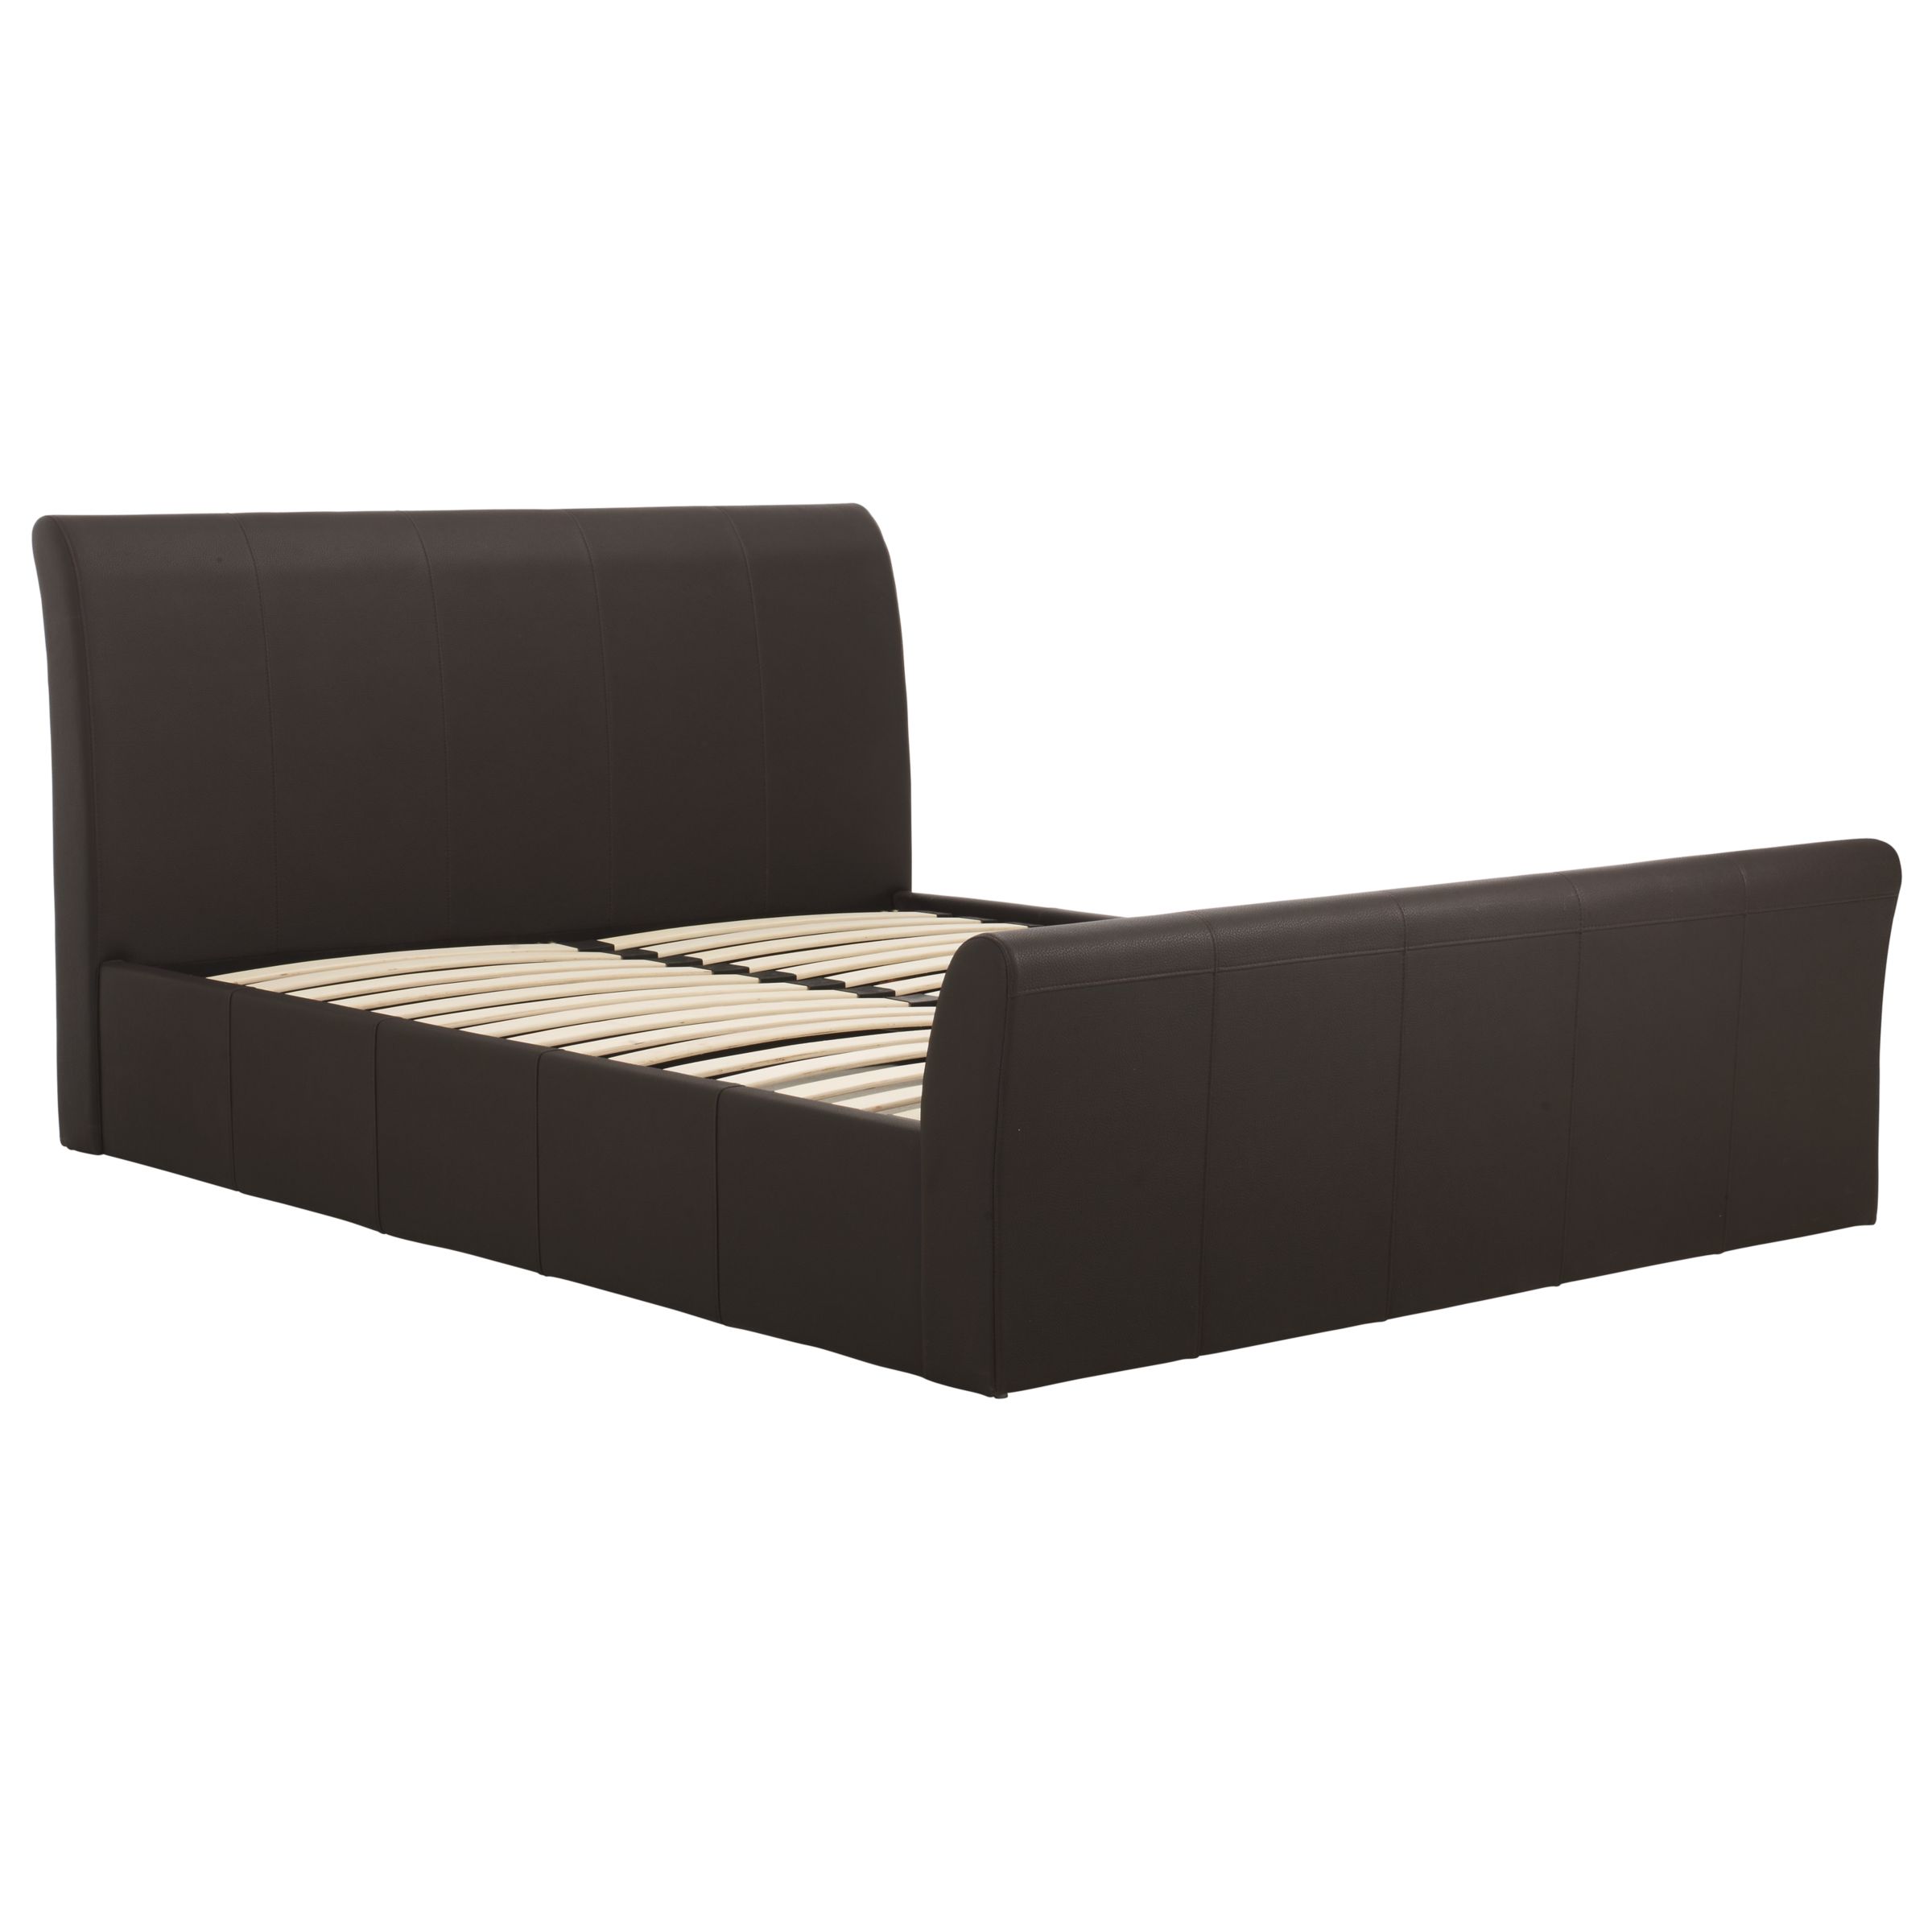 Chatham Bedstead, Chocolate, Double